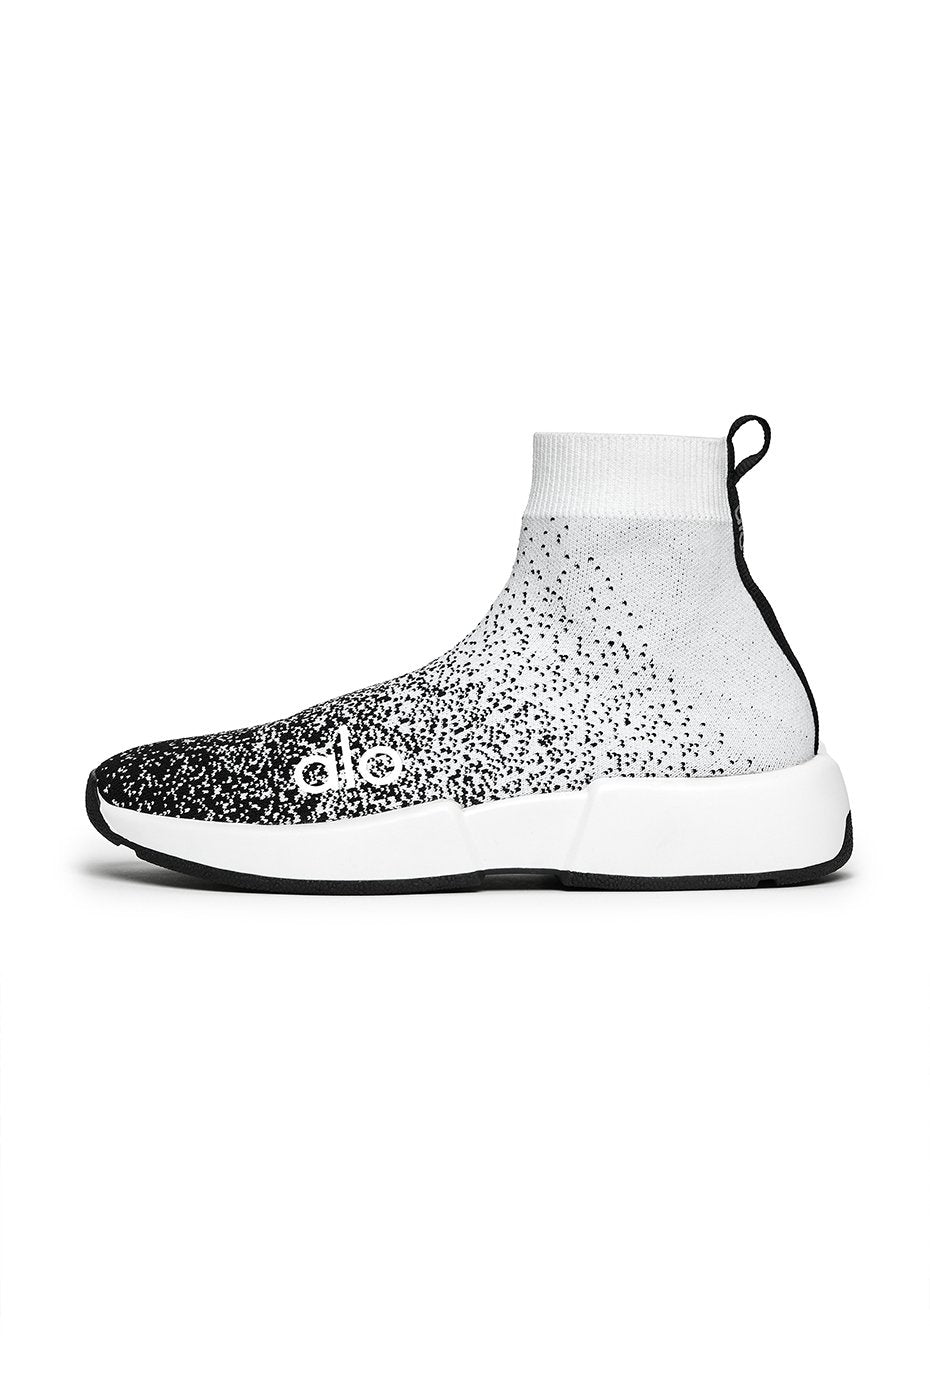 Alo Yoga Velocity Knit Sneakers Black Size 6 - $95 (52% Off Retail